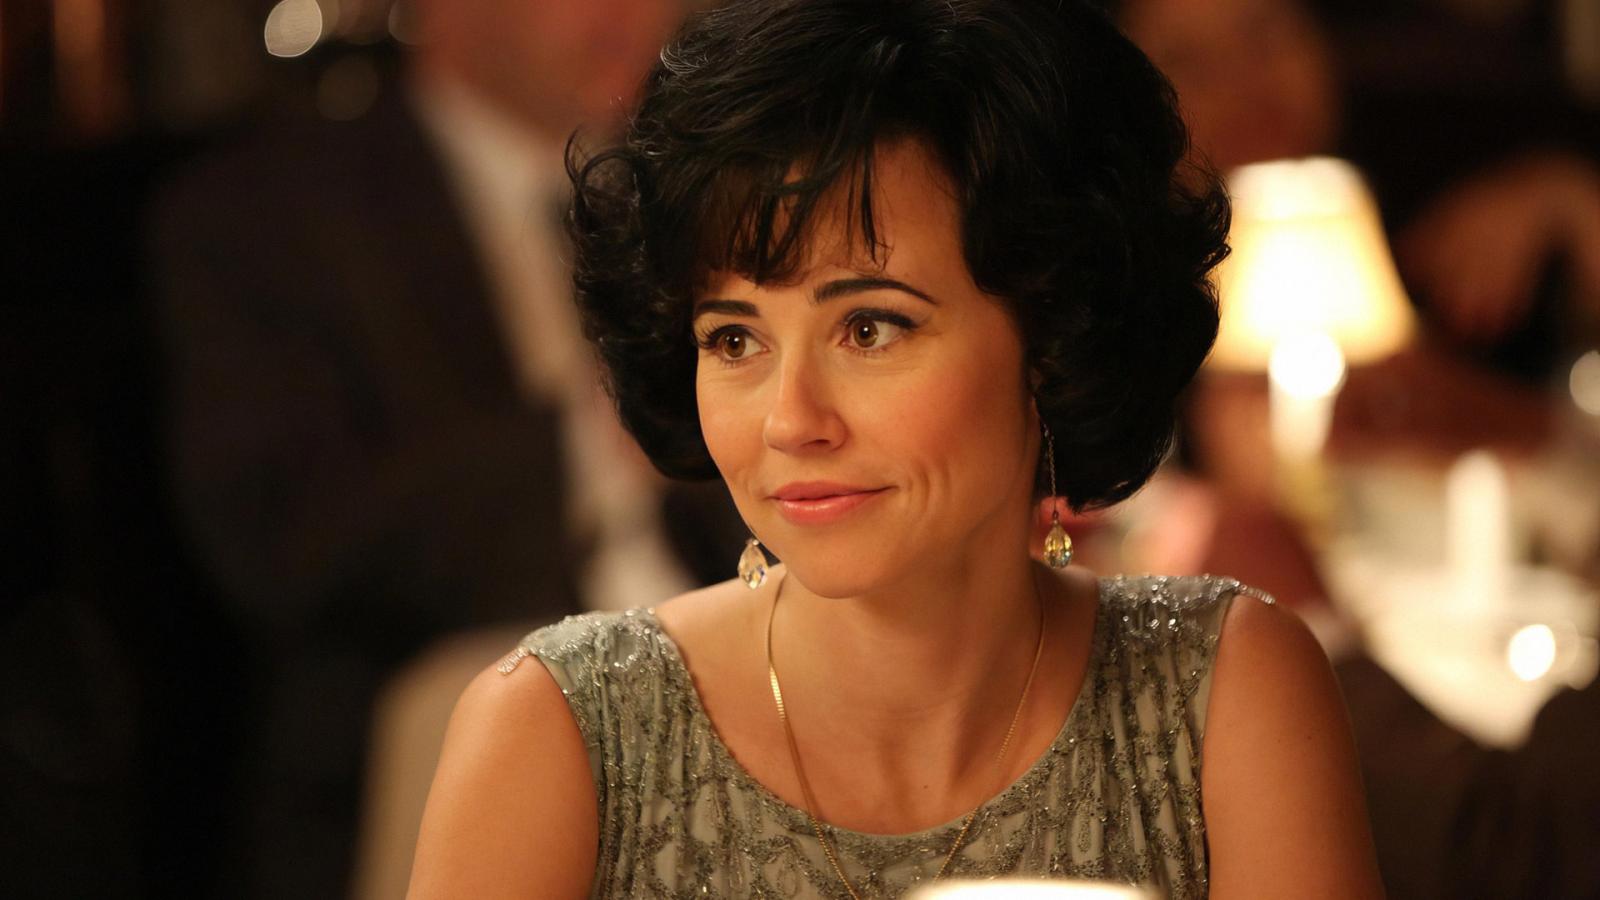 5 Celebrities You Totally Forgot Guest-Starred on Mad Men - image 2